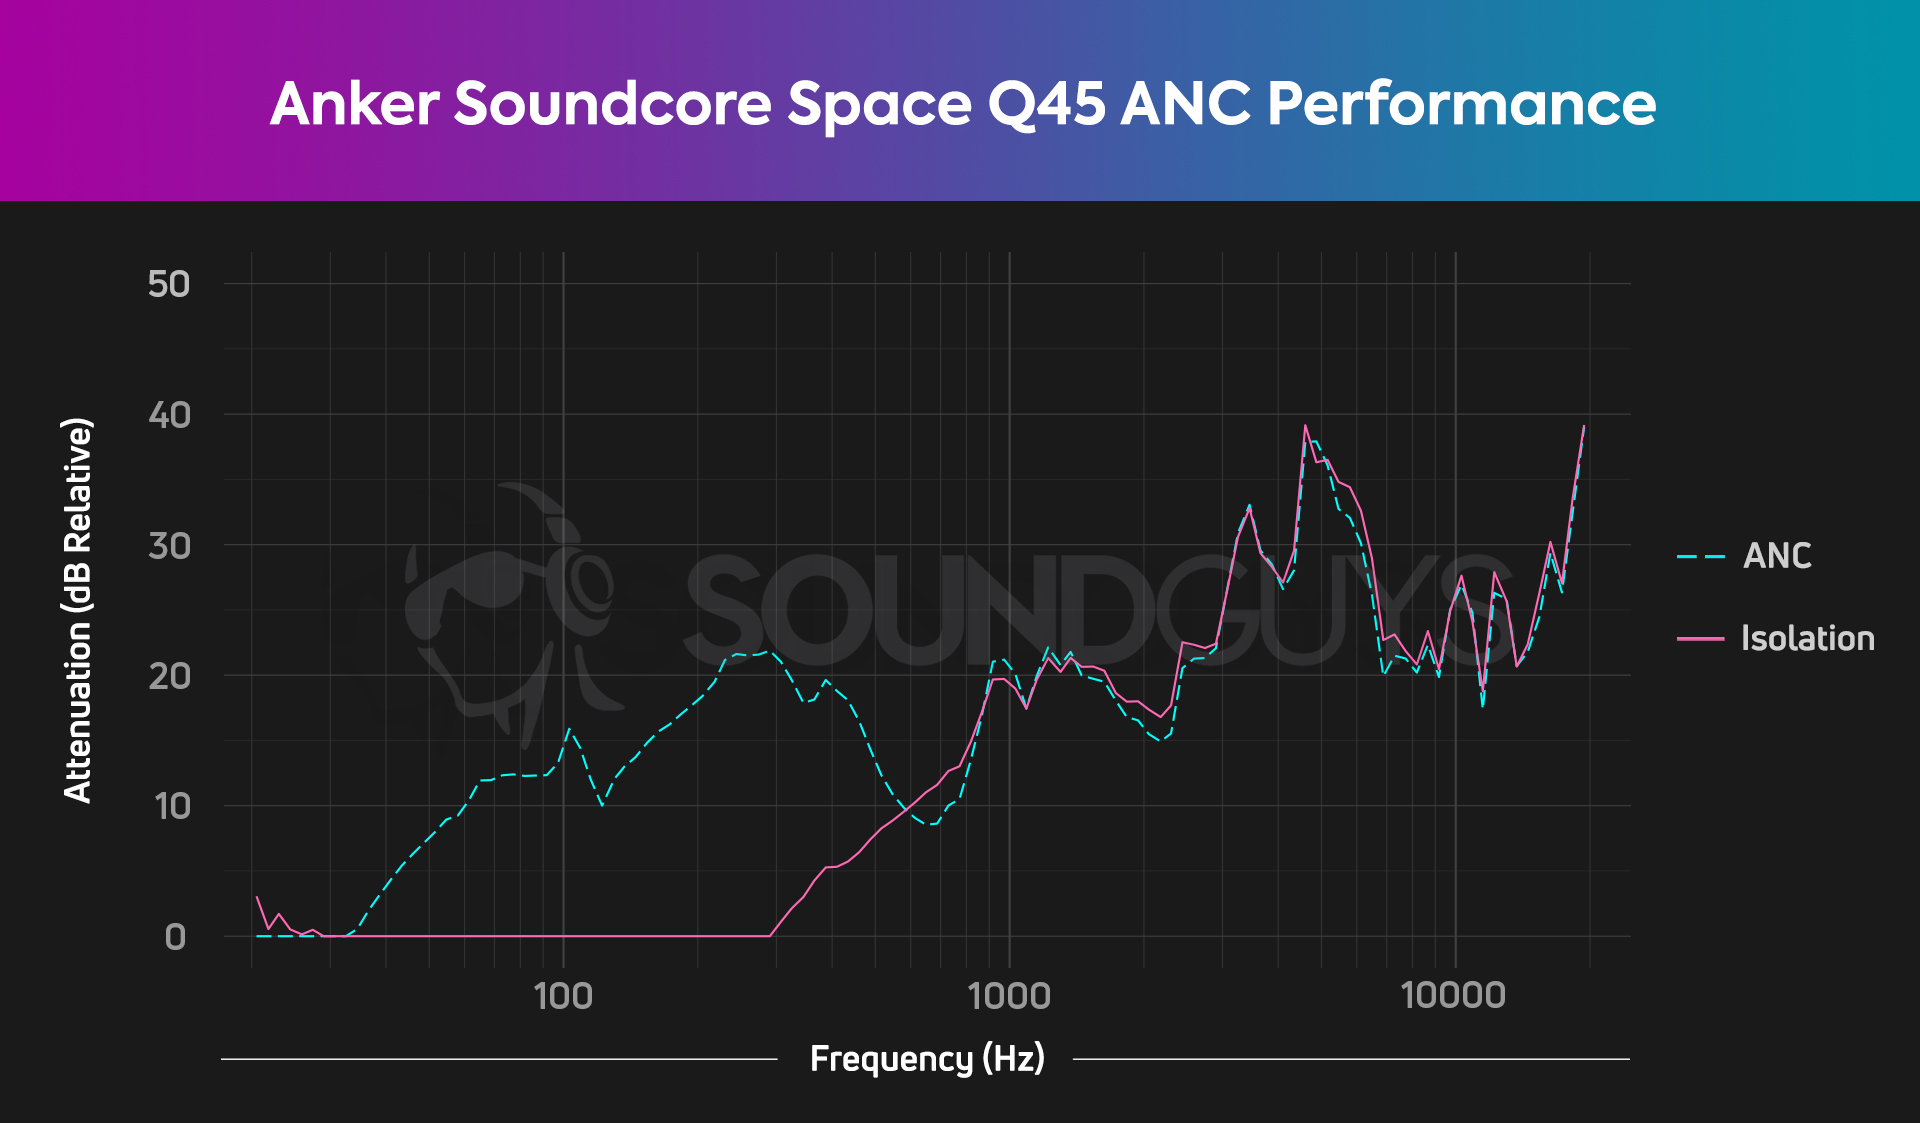 A chart depicts the Anker Soundcore Space Q45 isolation and noise canceling performances, with the ANC reducing midrange frequencies by one-quarter their original perceived loudness.